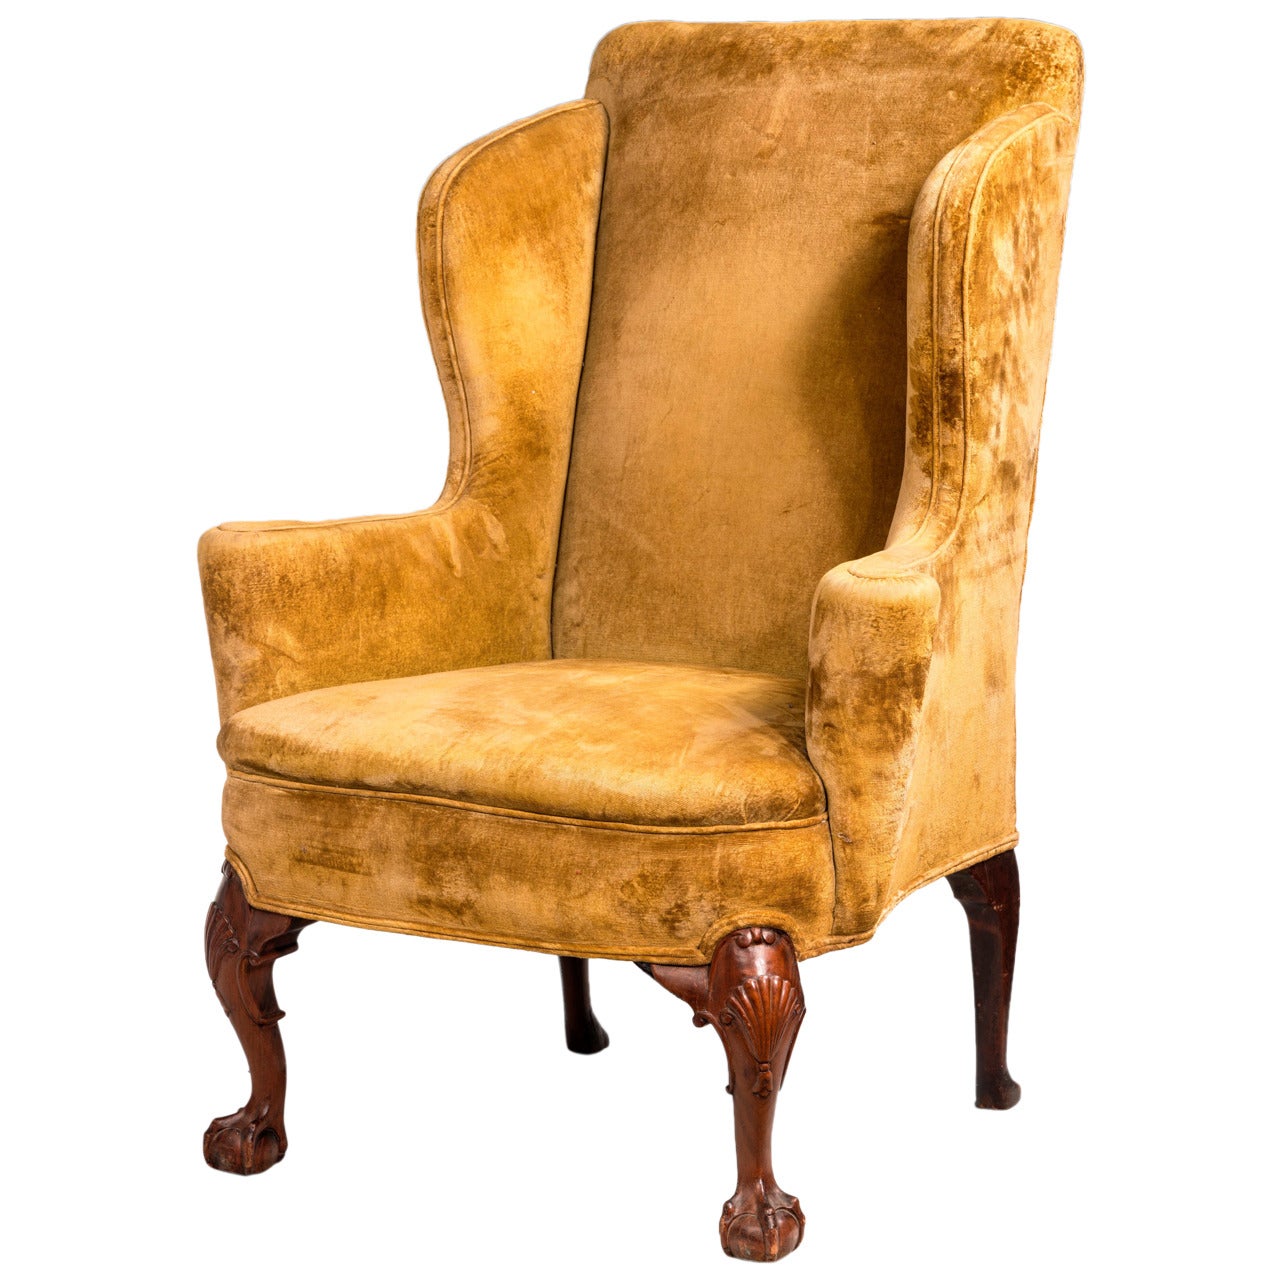 Late 19th Century Walnut-Framed Wing Chair